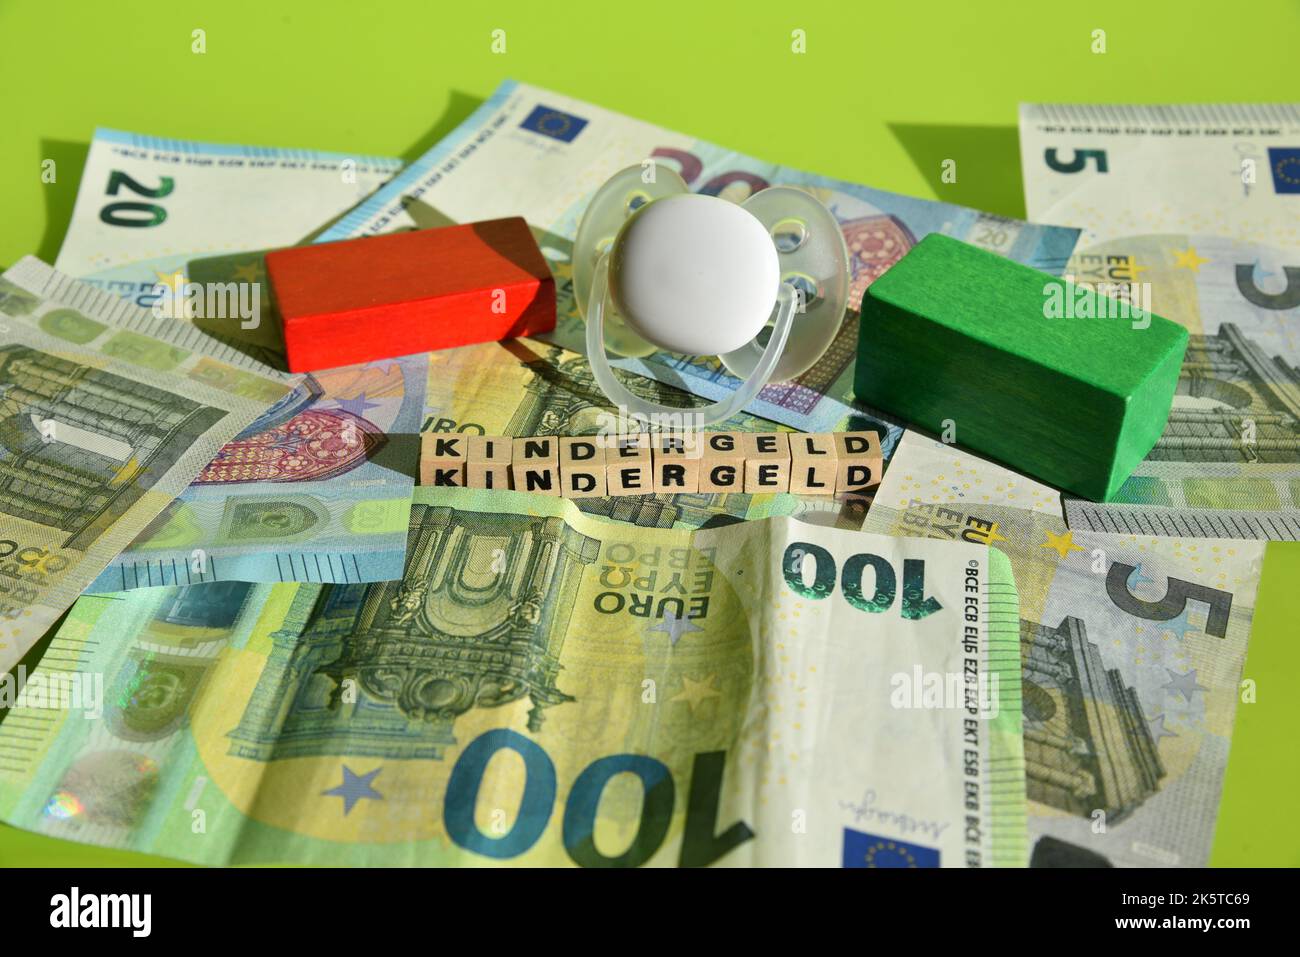 the german word for child benefit with wodden cubes and euro bills Stock Photo